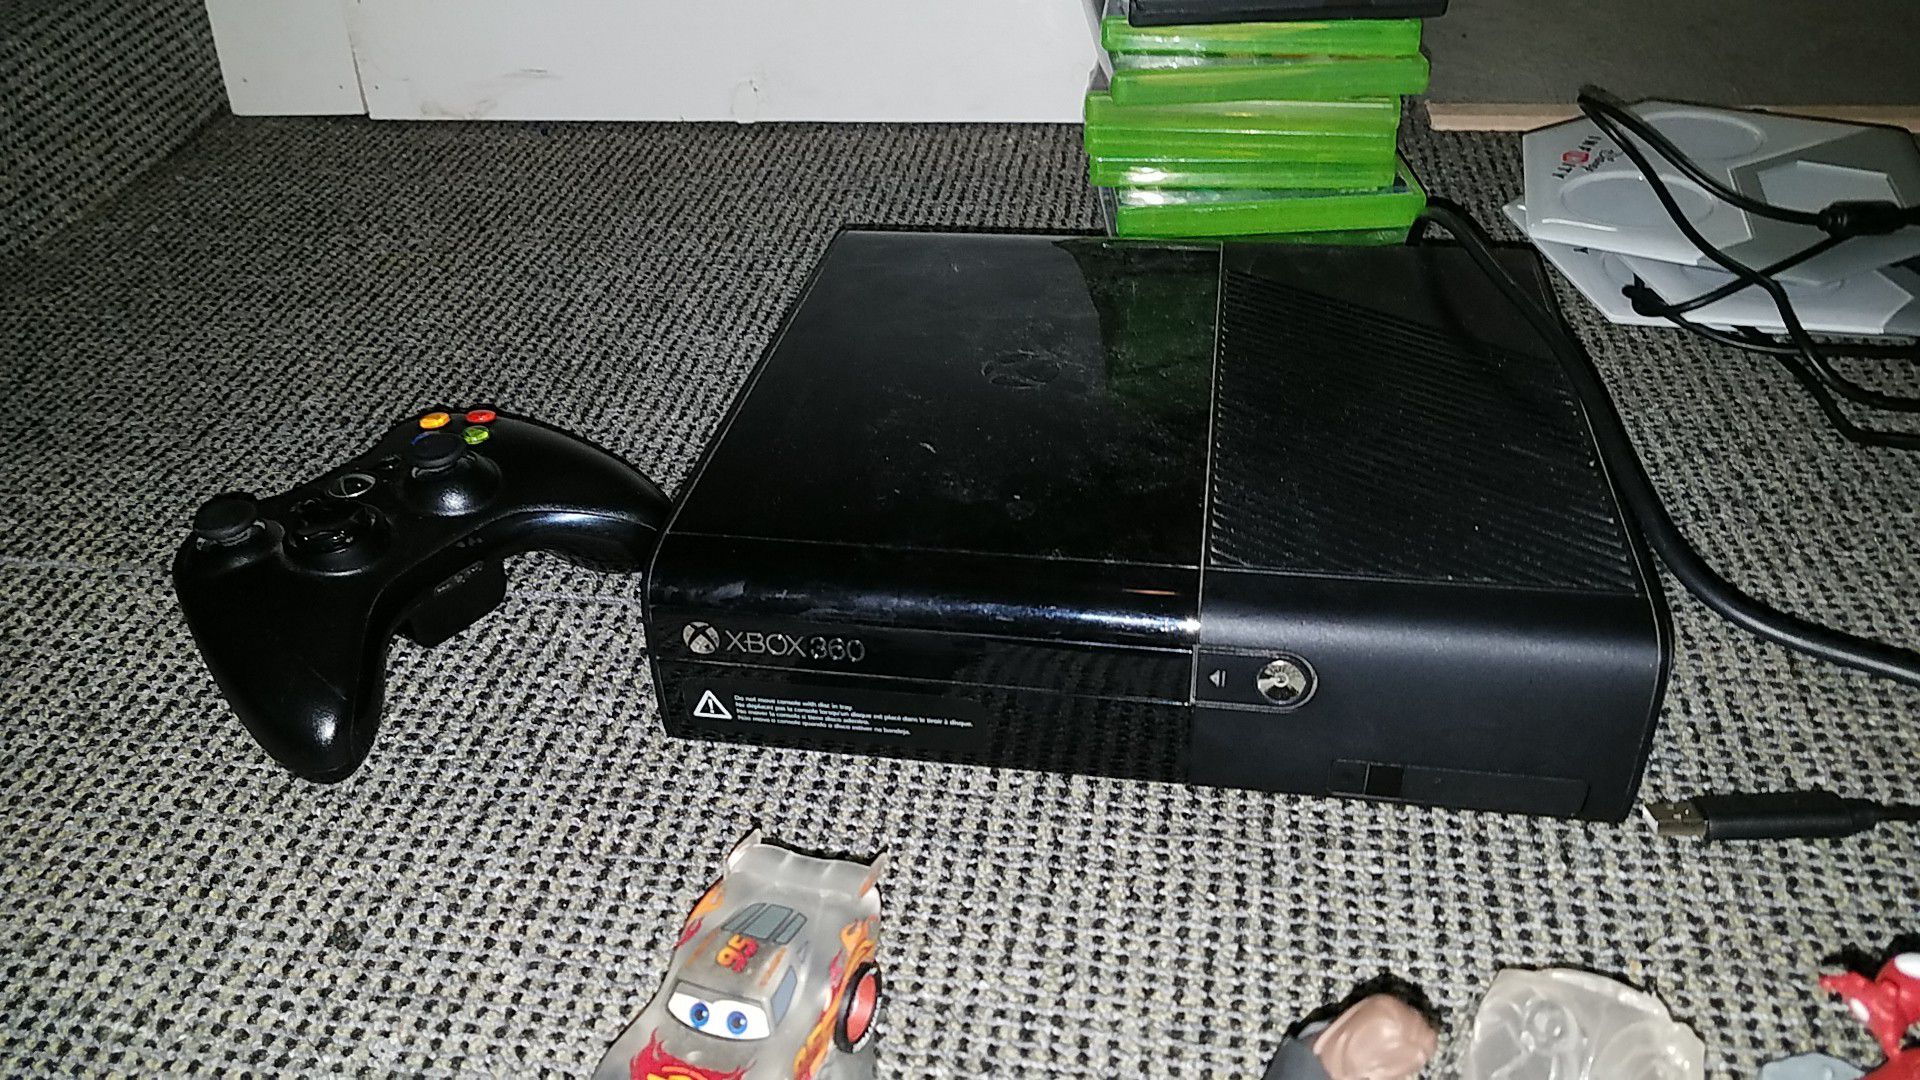 Xbox 360 with lot game xfinty set with , characters with two remotes and it works perfectly fine